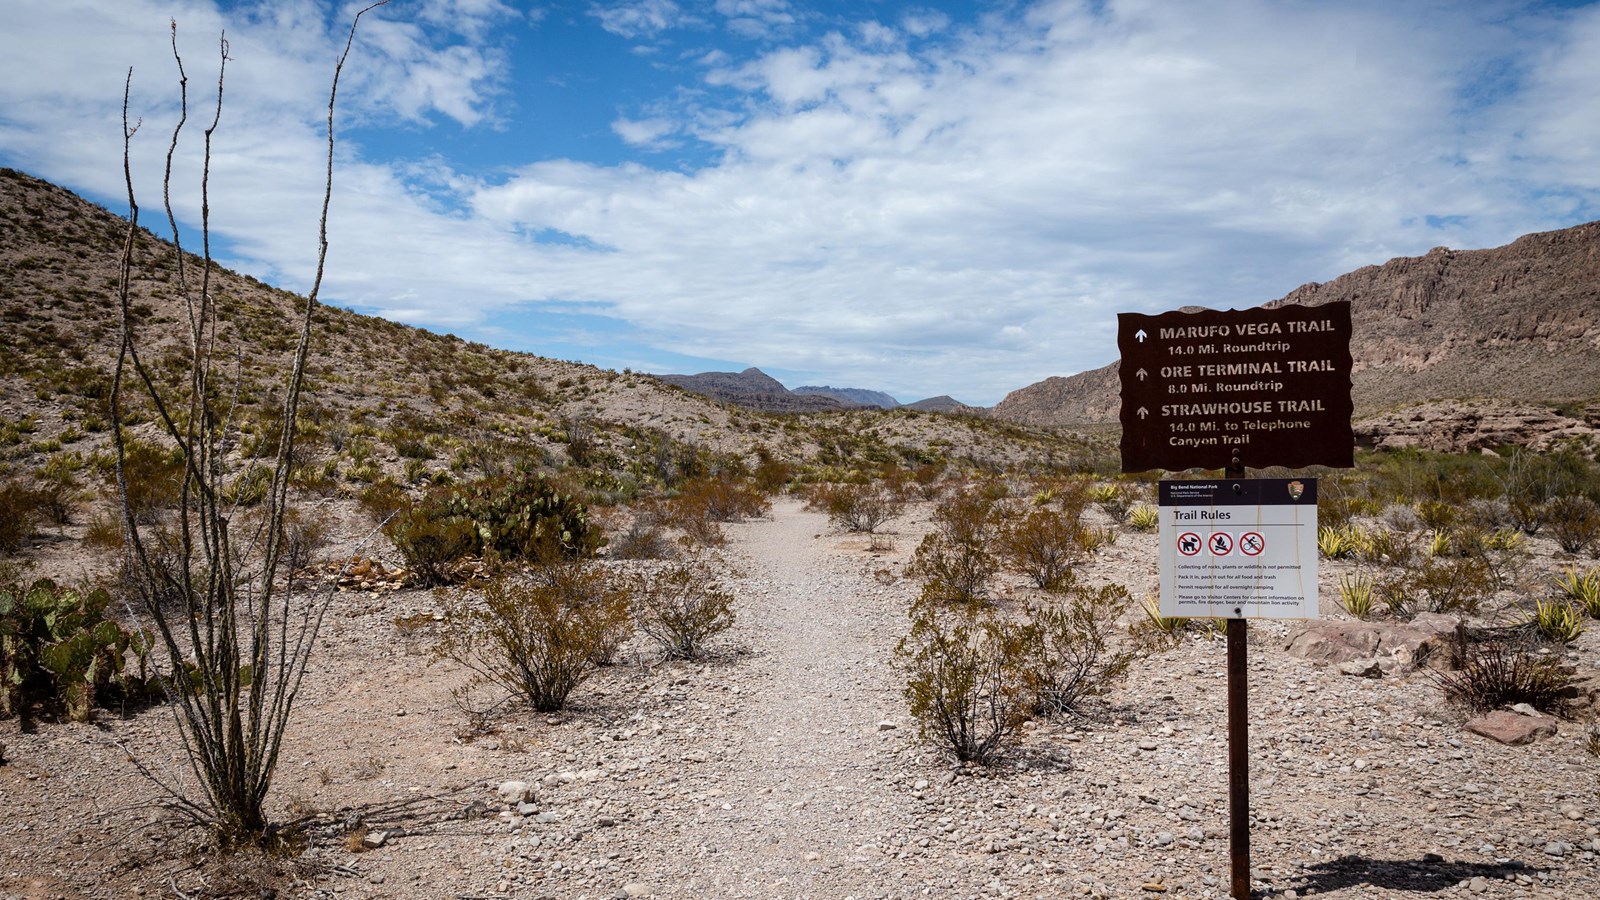 A metal sign with trail information sits beside a dirt path heading into the mountains.